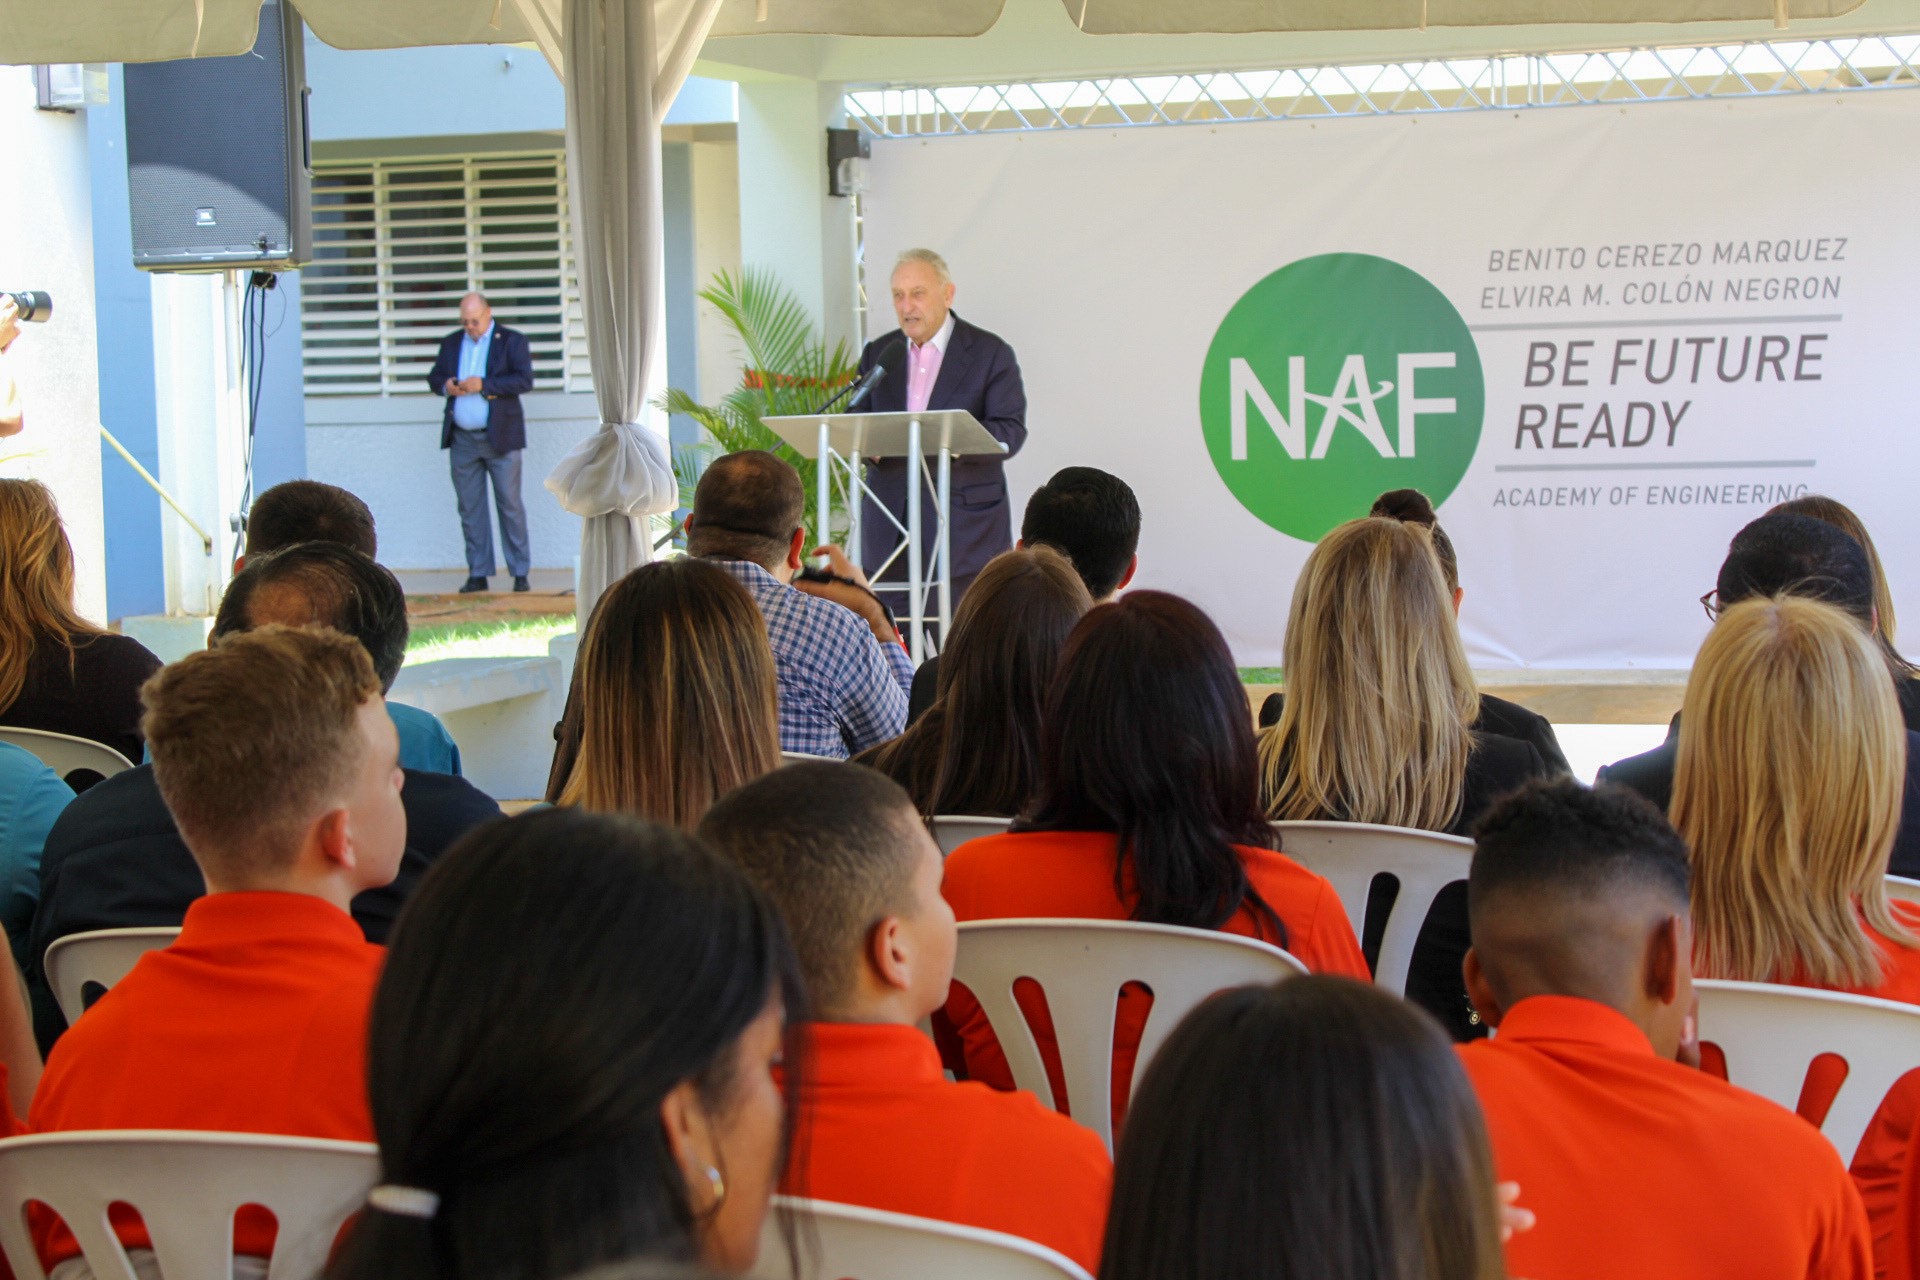 Sandy I. Weill gives a speech at a NAF event in Puerto Rico